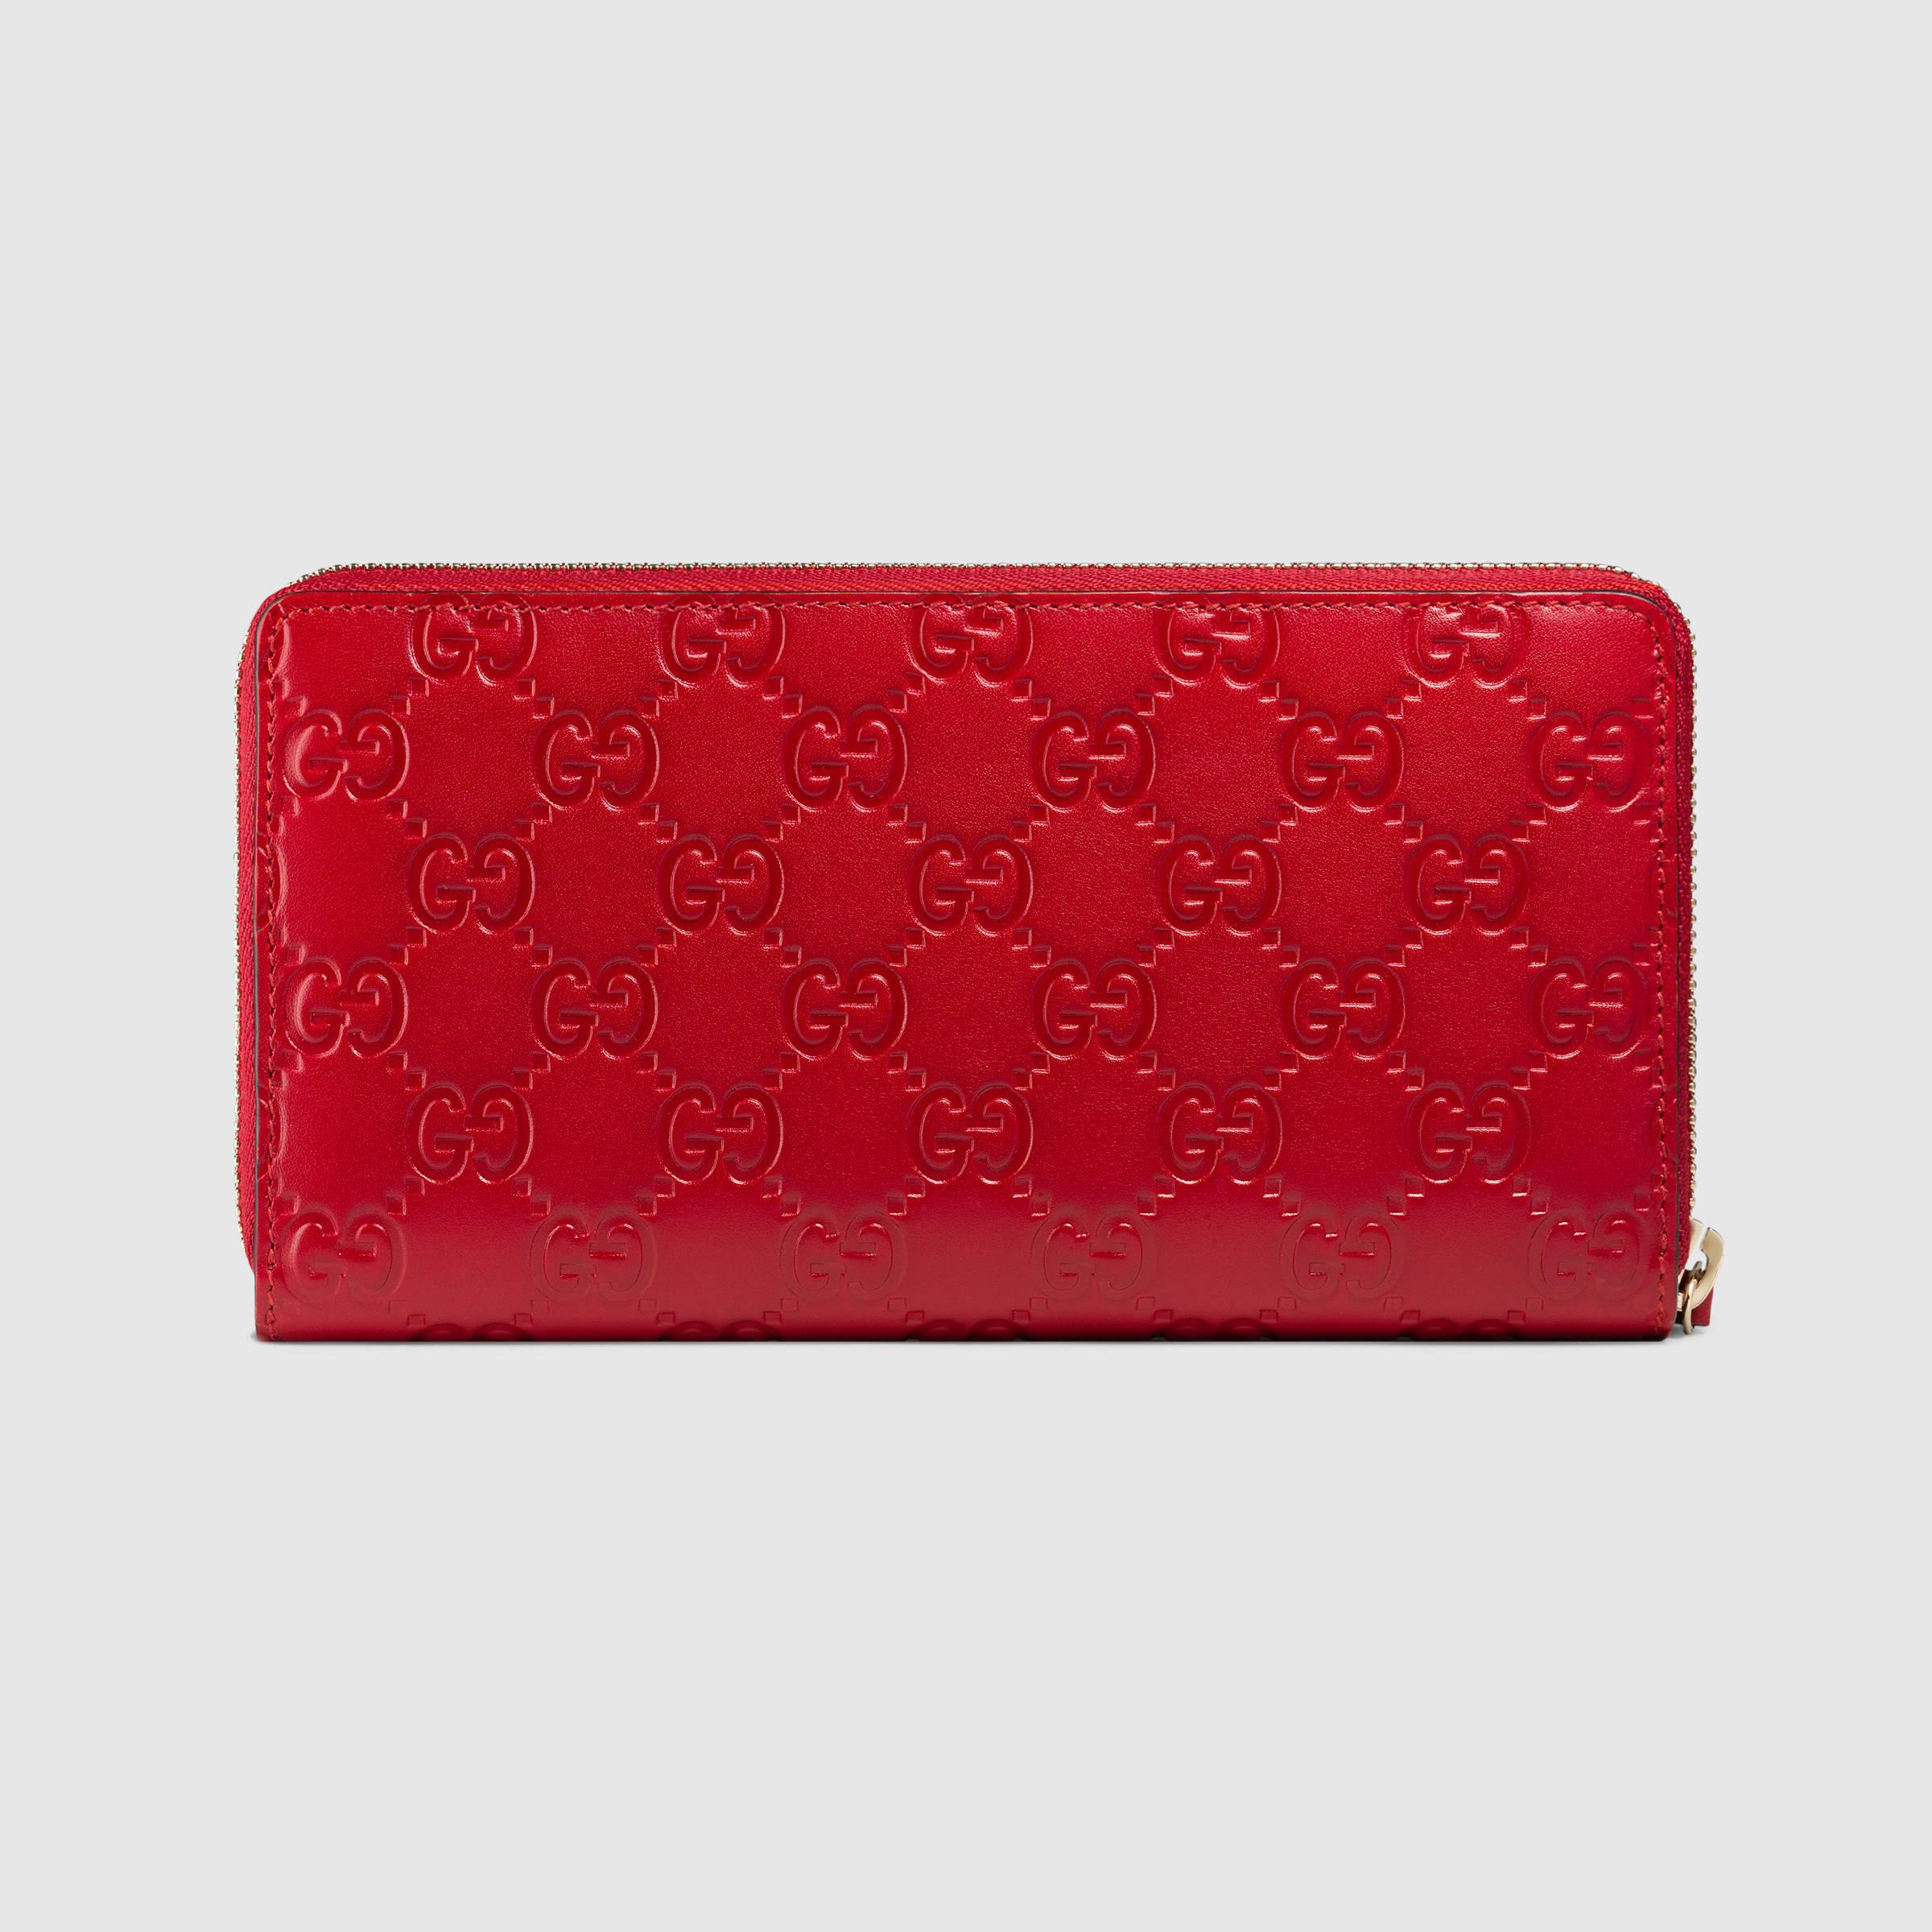 Gucci Leather Bow Signature Continental Wallet in Red - Lyst